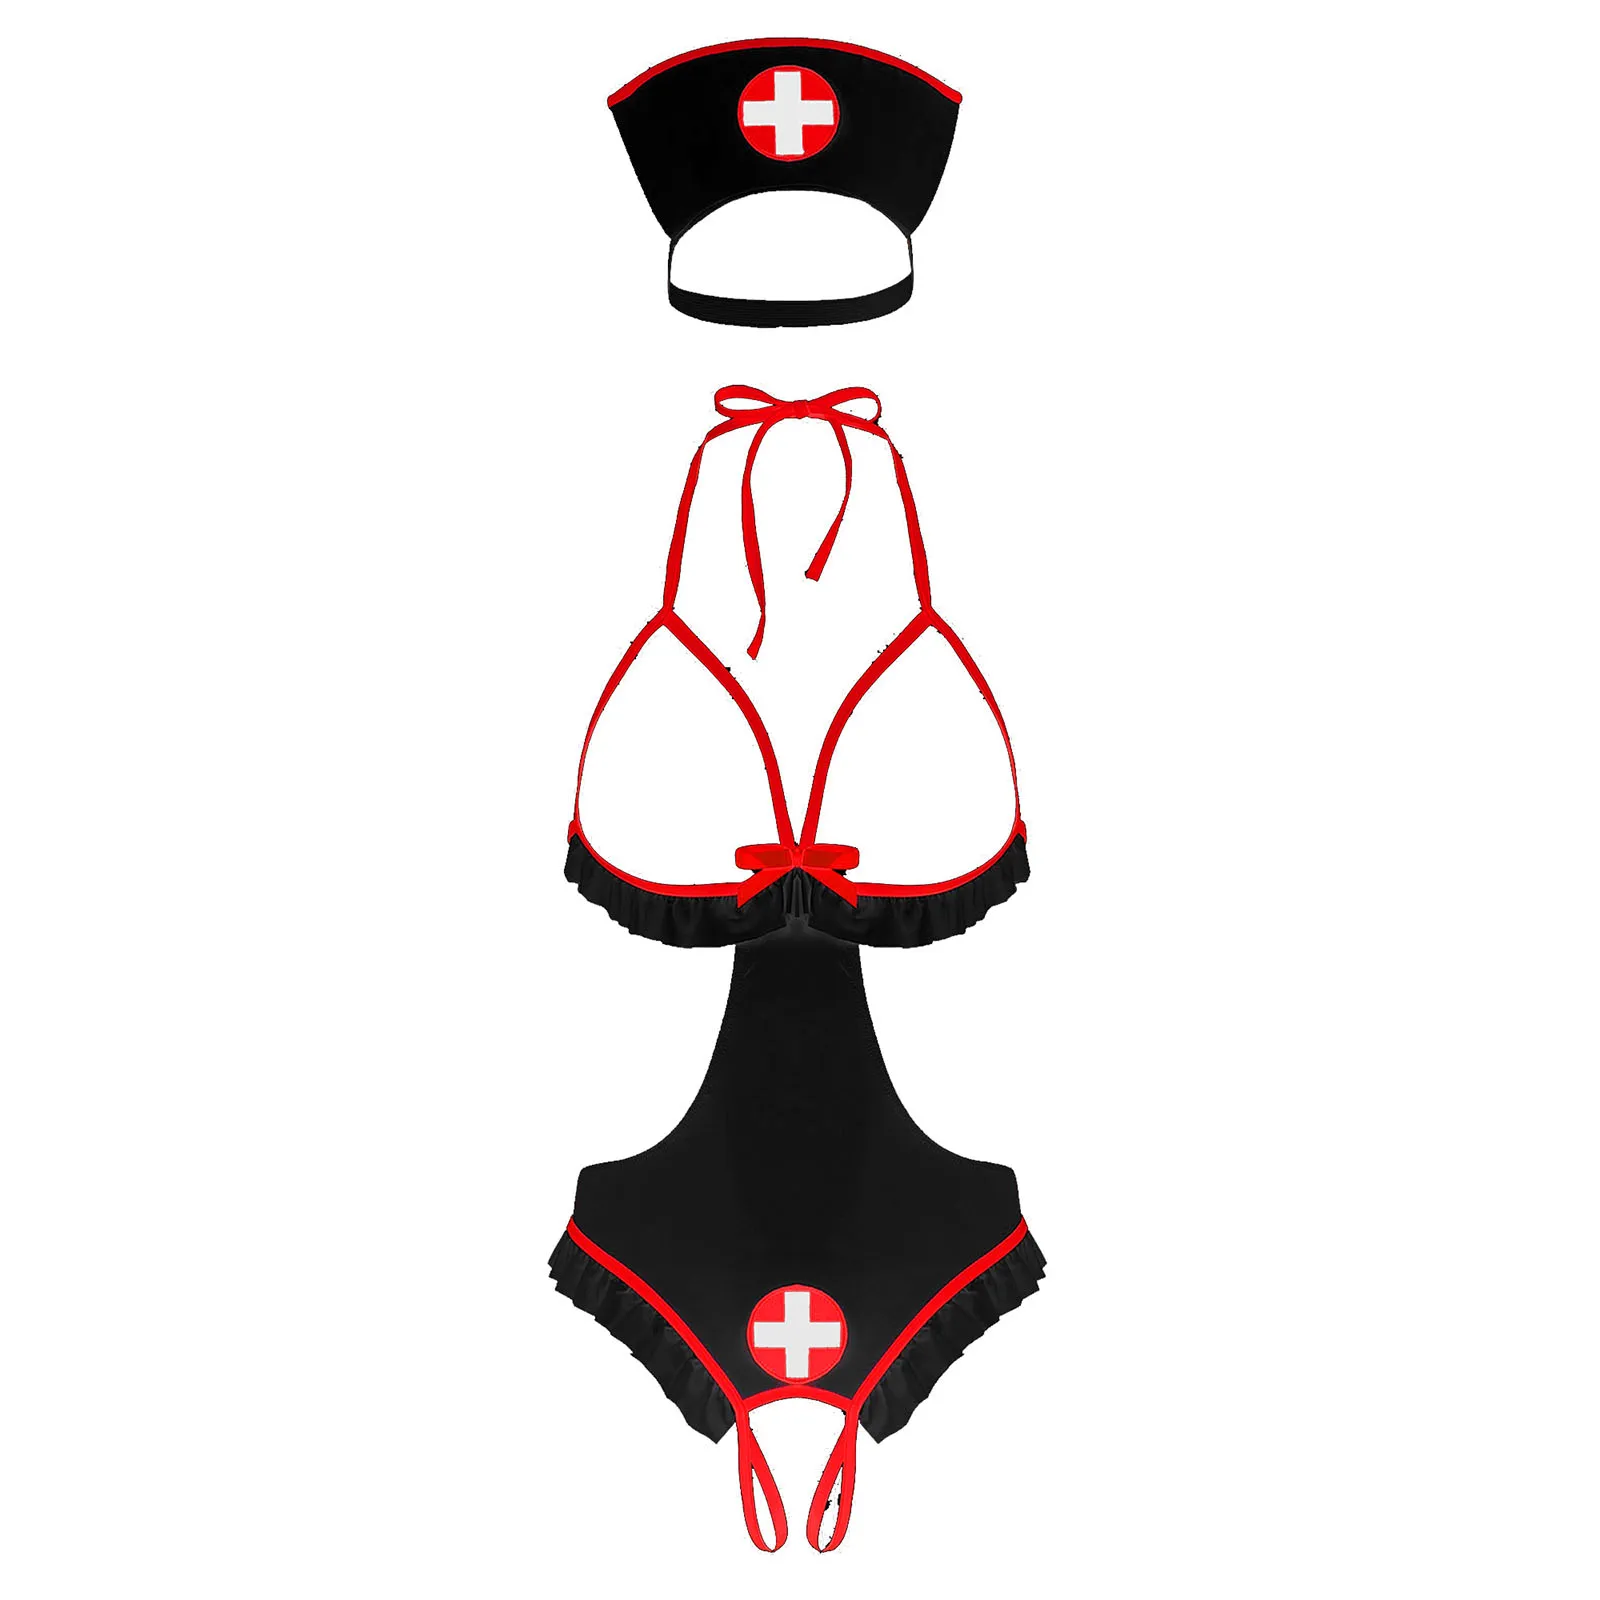 

Womens Fantasy Nurse Sexy Cosplay Roleplay Lingerie Set Halter Neck Open Cups Crotchless Tie-on Leotard Bodysuit with Headband